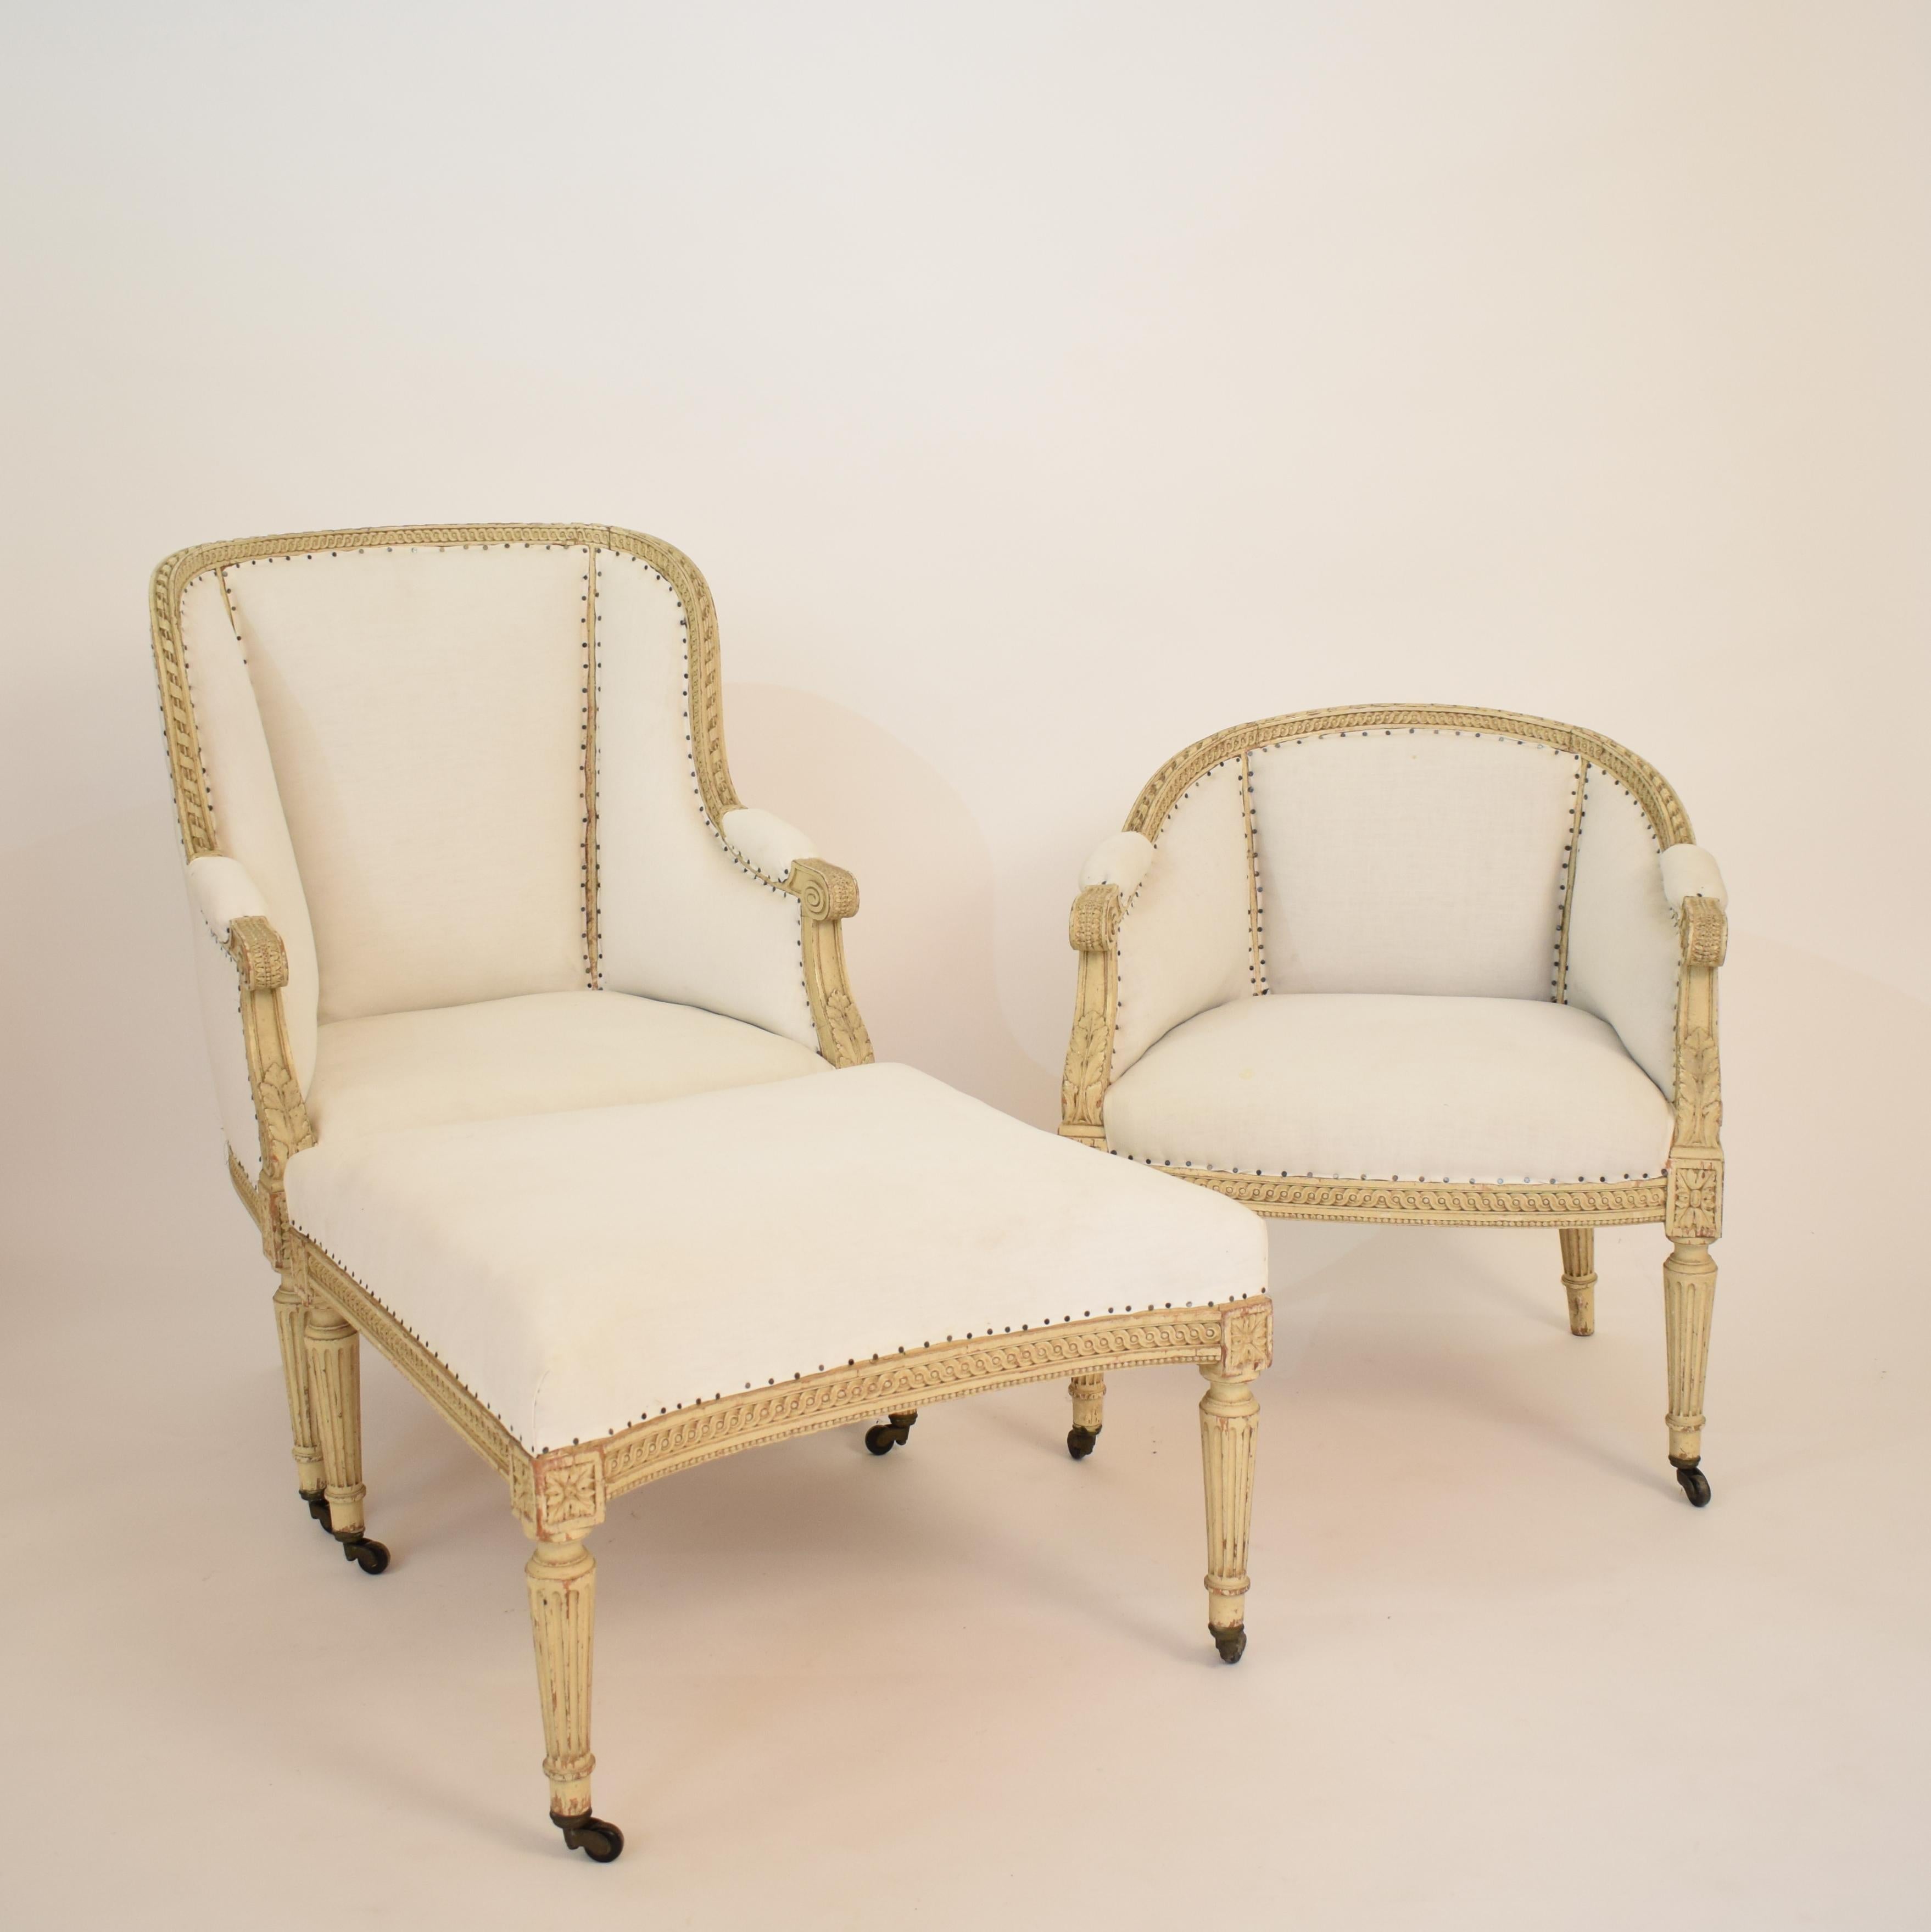 1850s Louis XVI Style Duchesse Brisee in Original Lacquer and Re-Upholstered 4